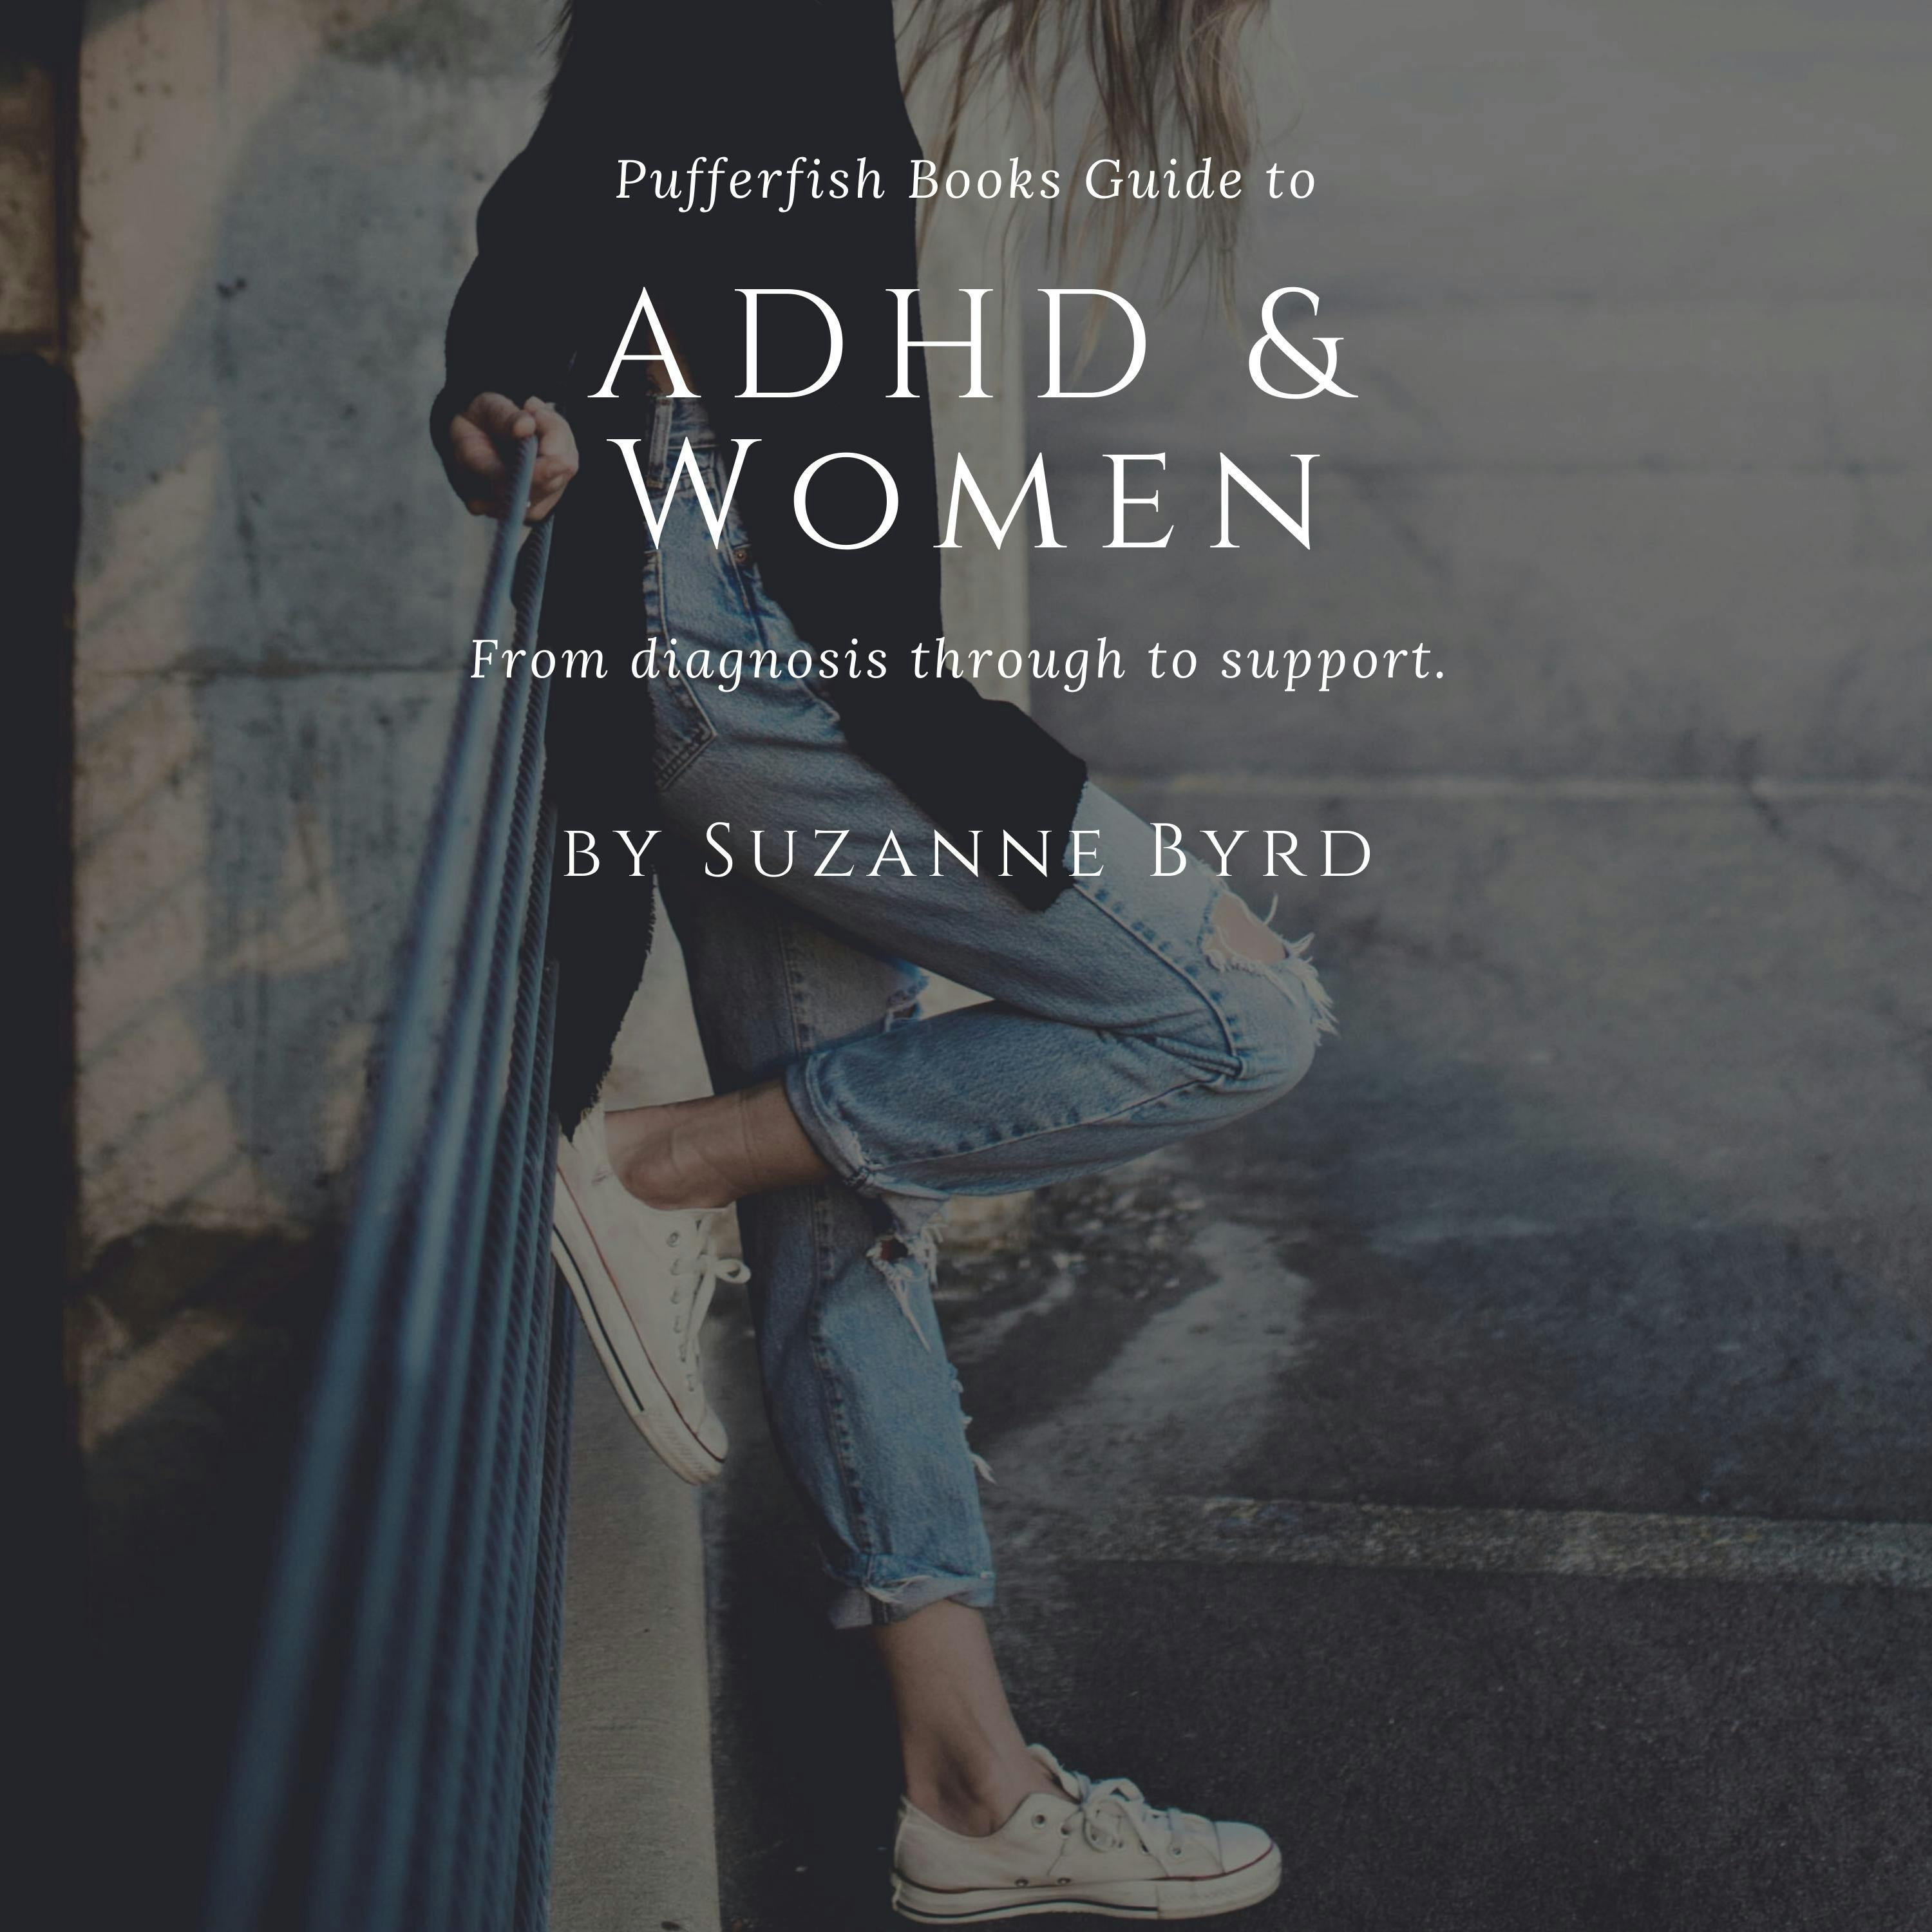 ADHD and Women: What typifies ADHD in adult women, how is it different to ADHD in men; and what are the main signs and symptoms of ADHD in women - Suzanne Byrd